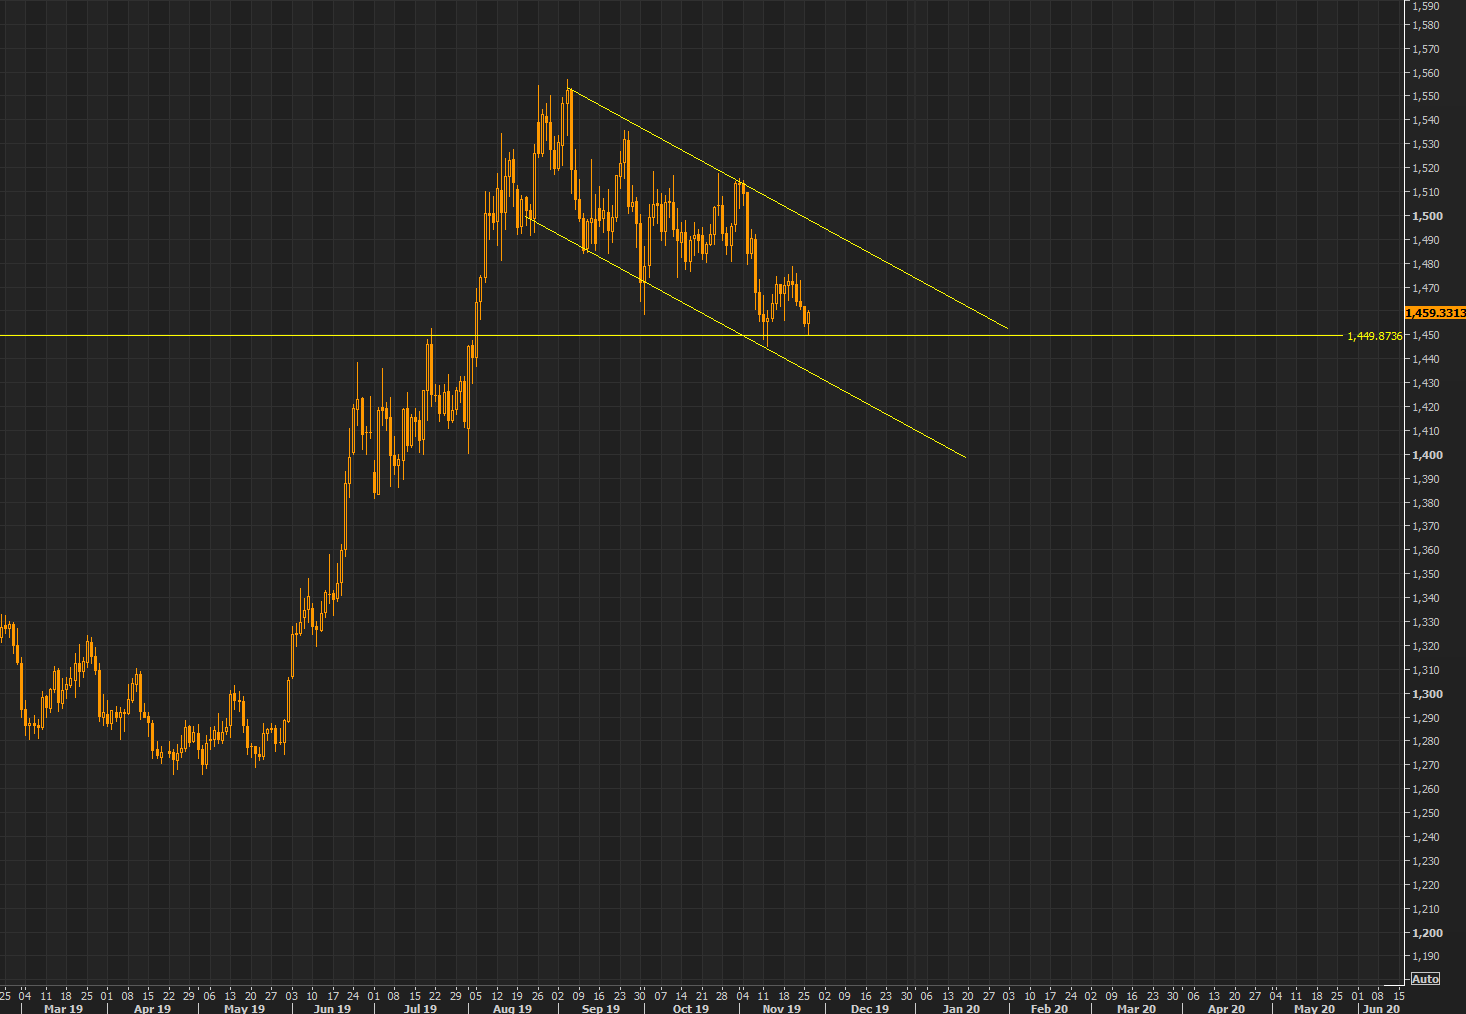 Gold - bouncing on the big 1450 support